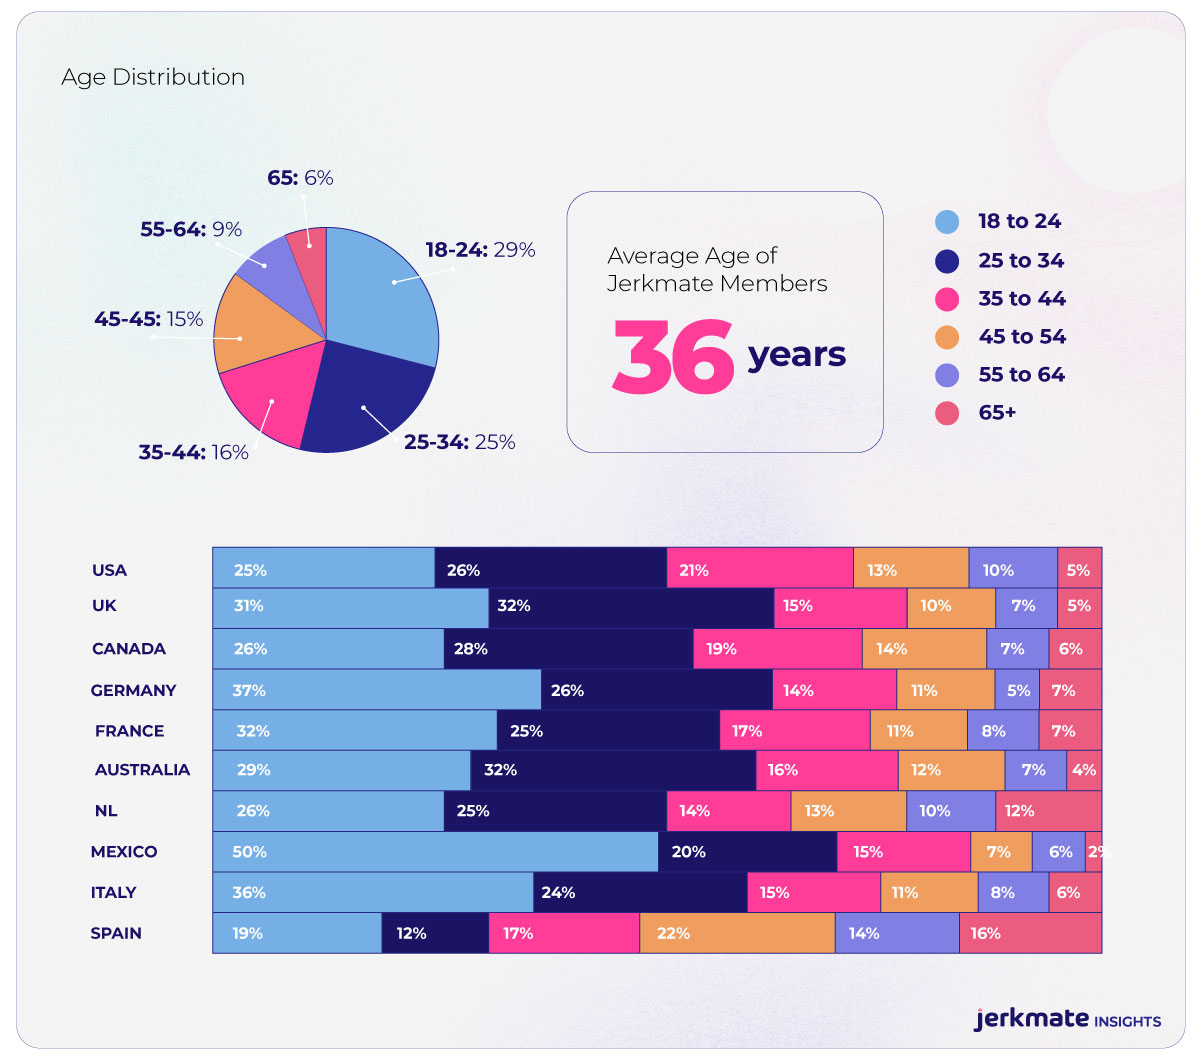 age distribution by country